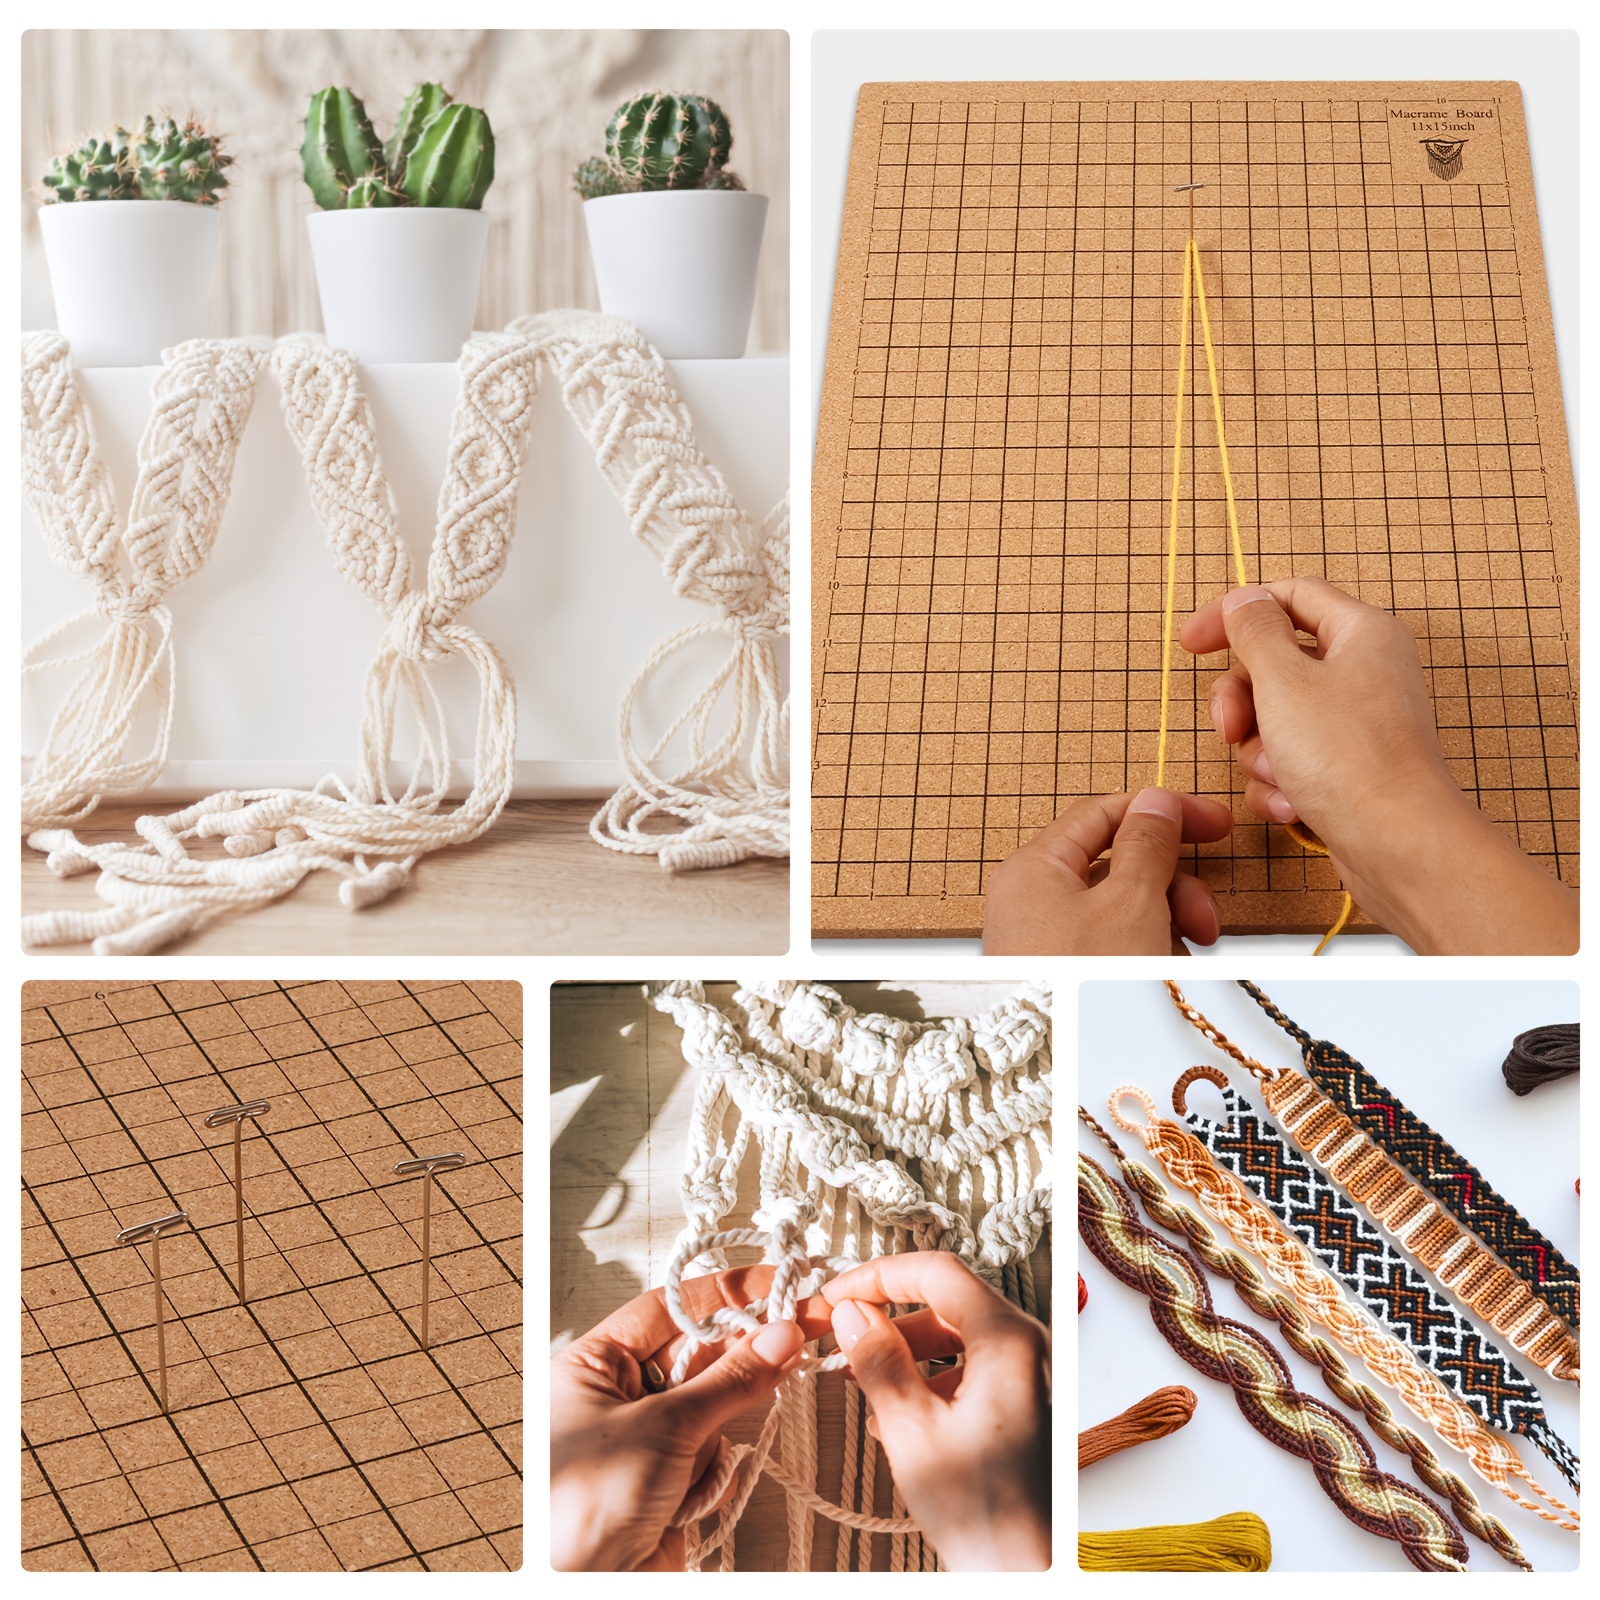 Macrame Board Double-Sided Grids Large Cork Board for Bracelet Project with  Instructions (8x8 inch)